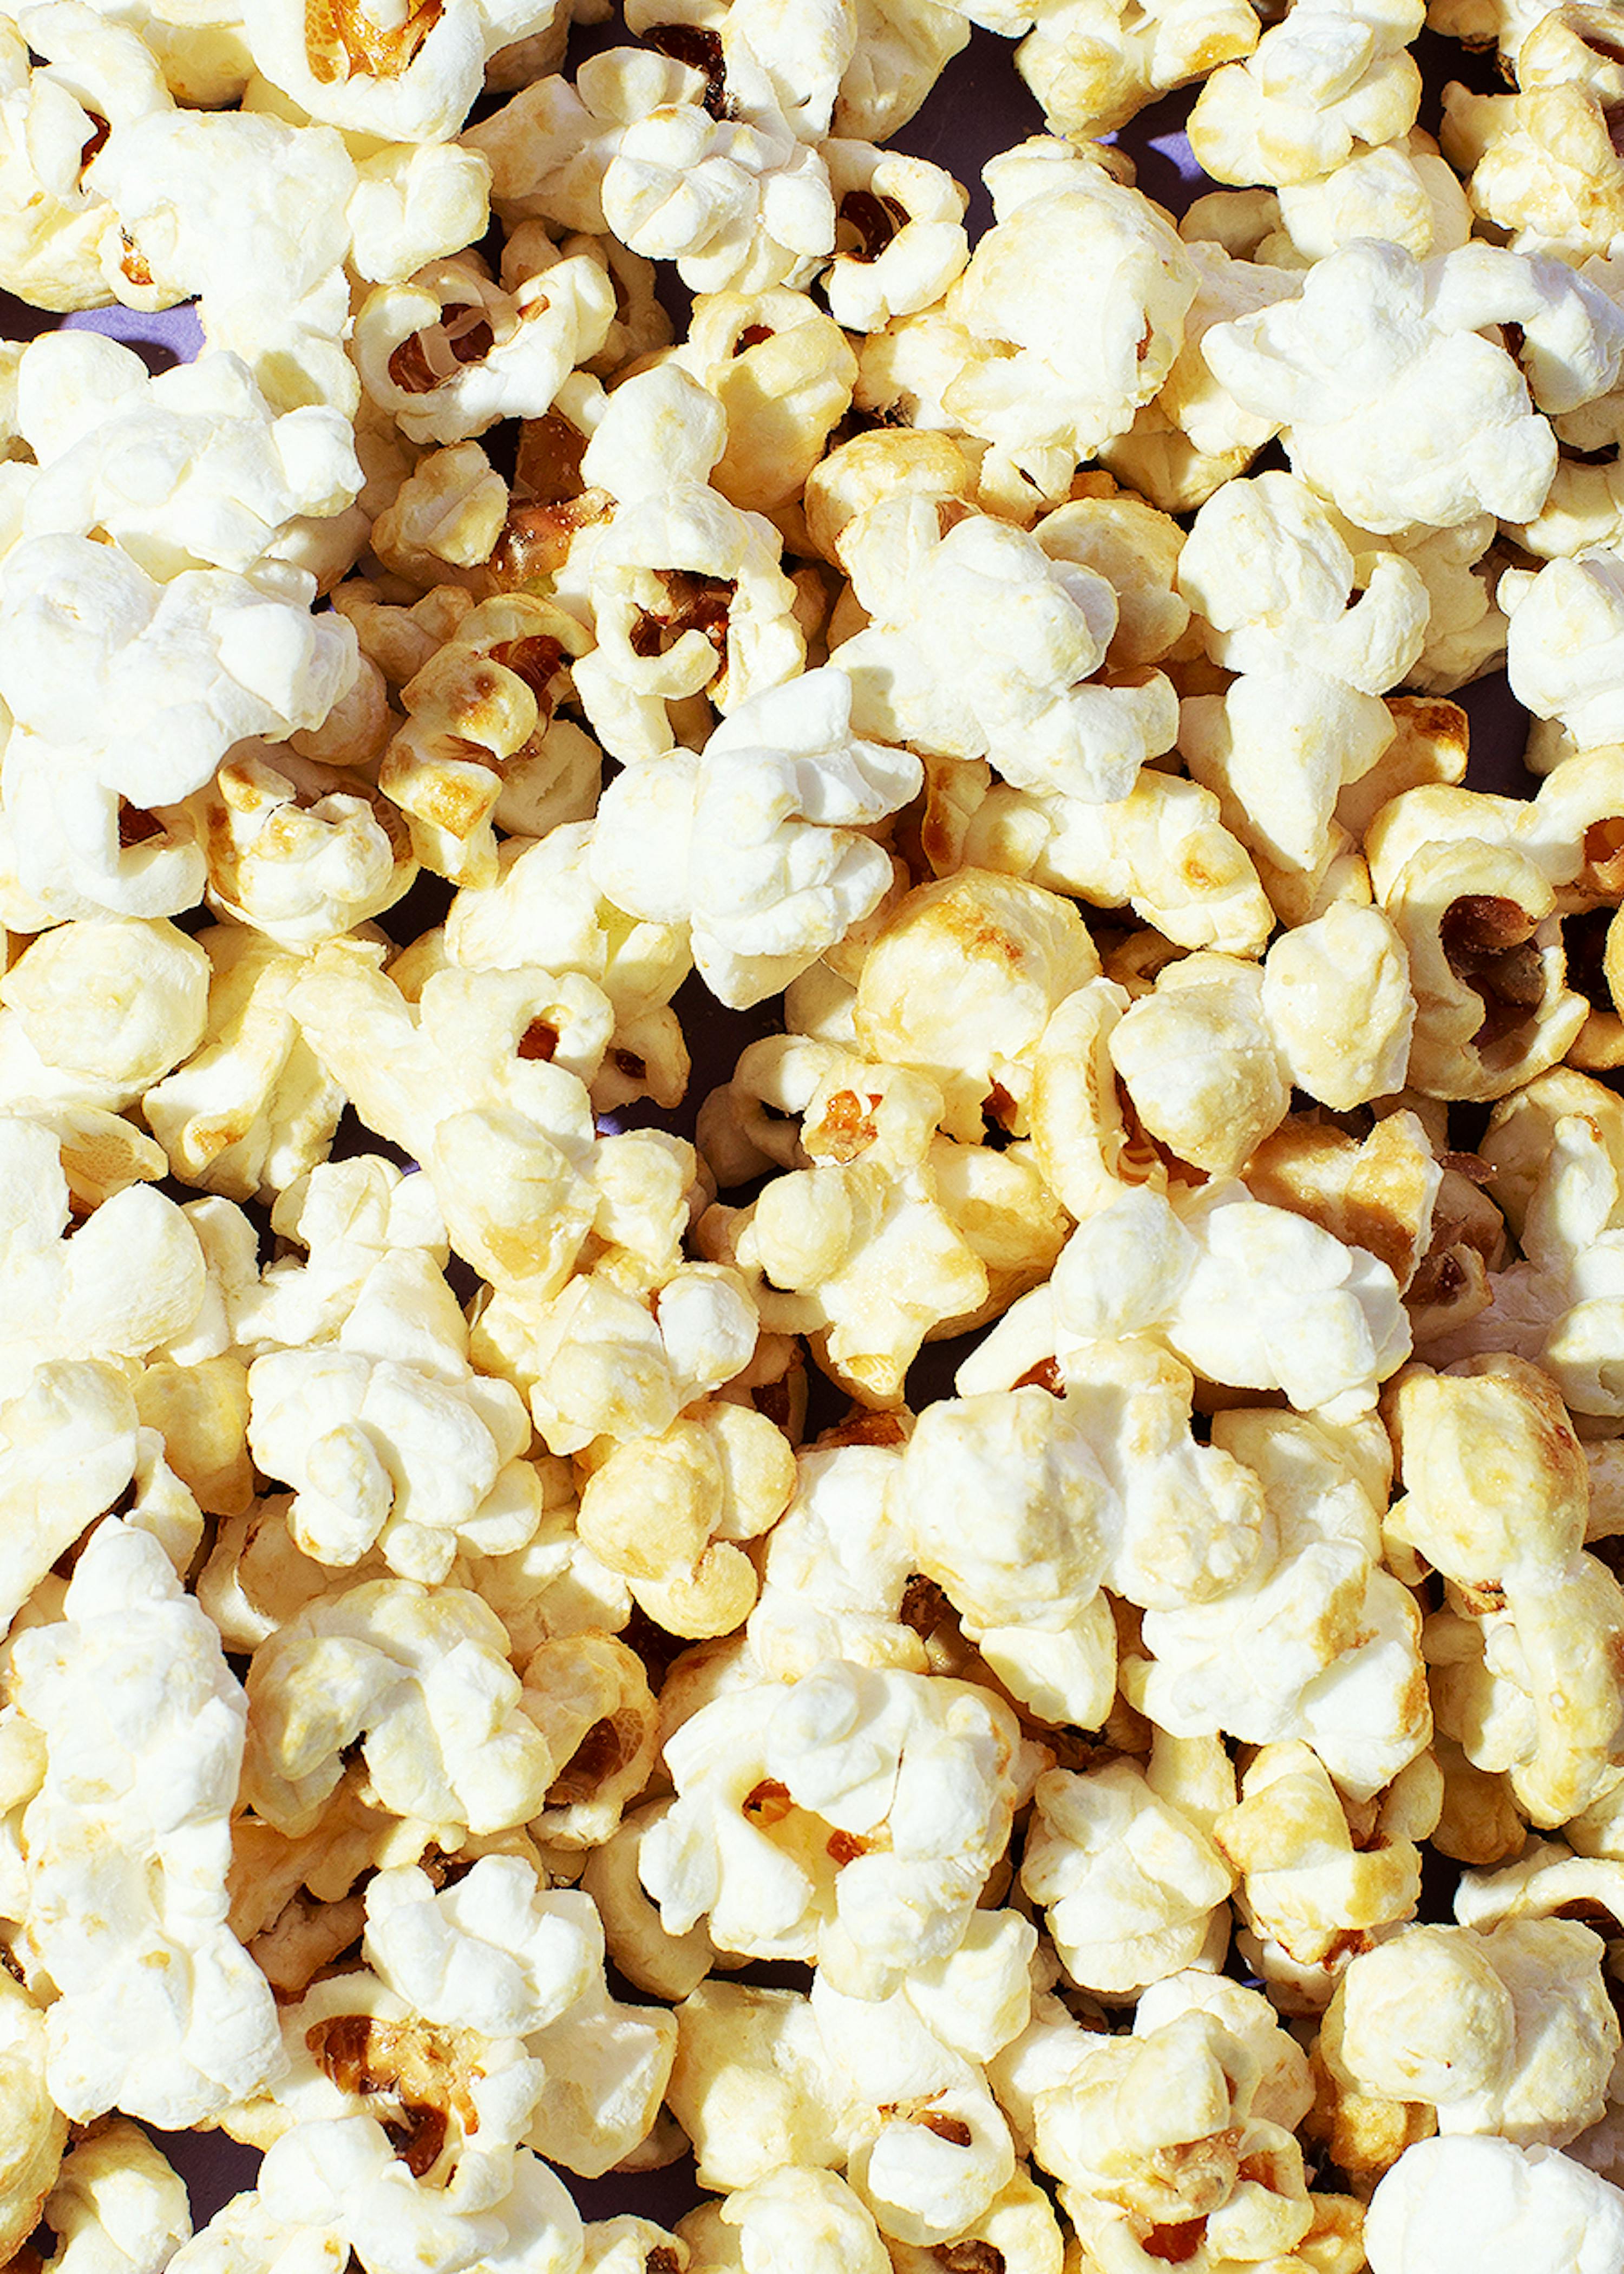 Buy ready-to-eat organic sweet and salty popcorn